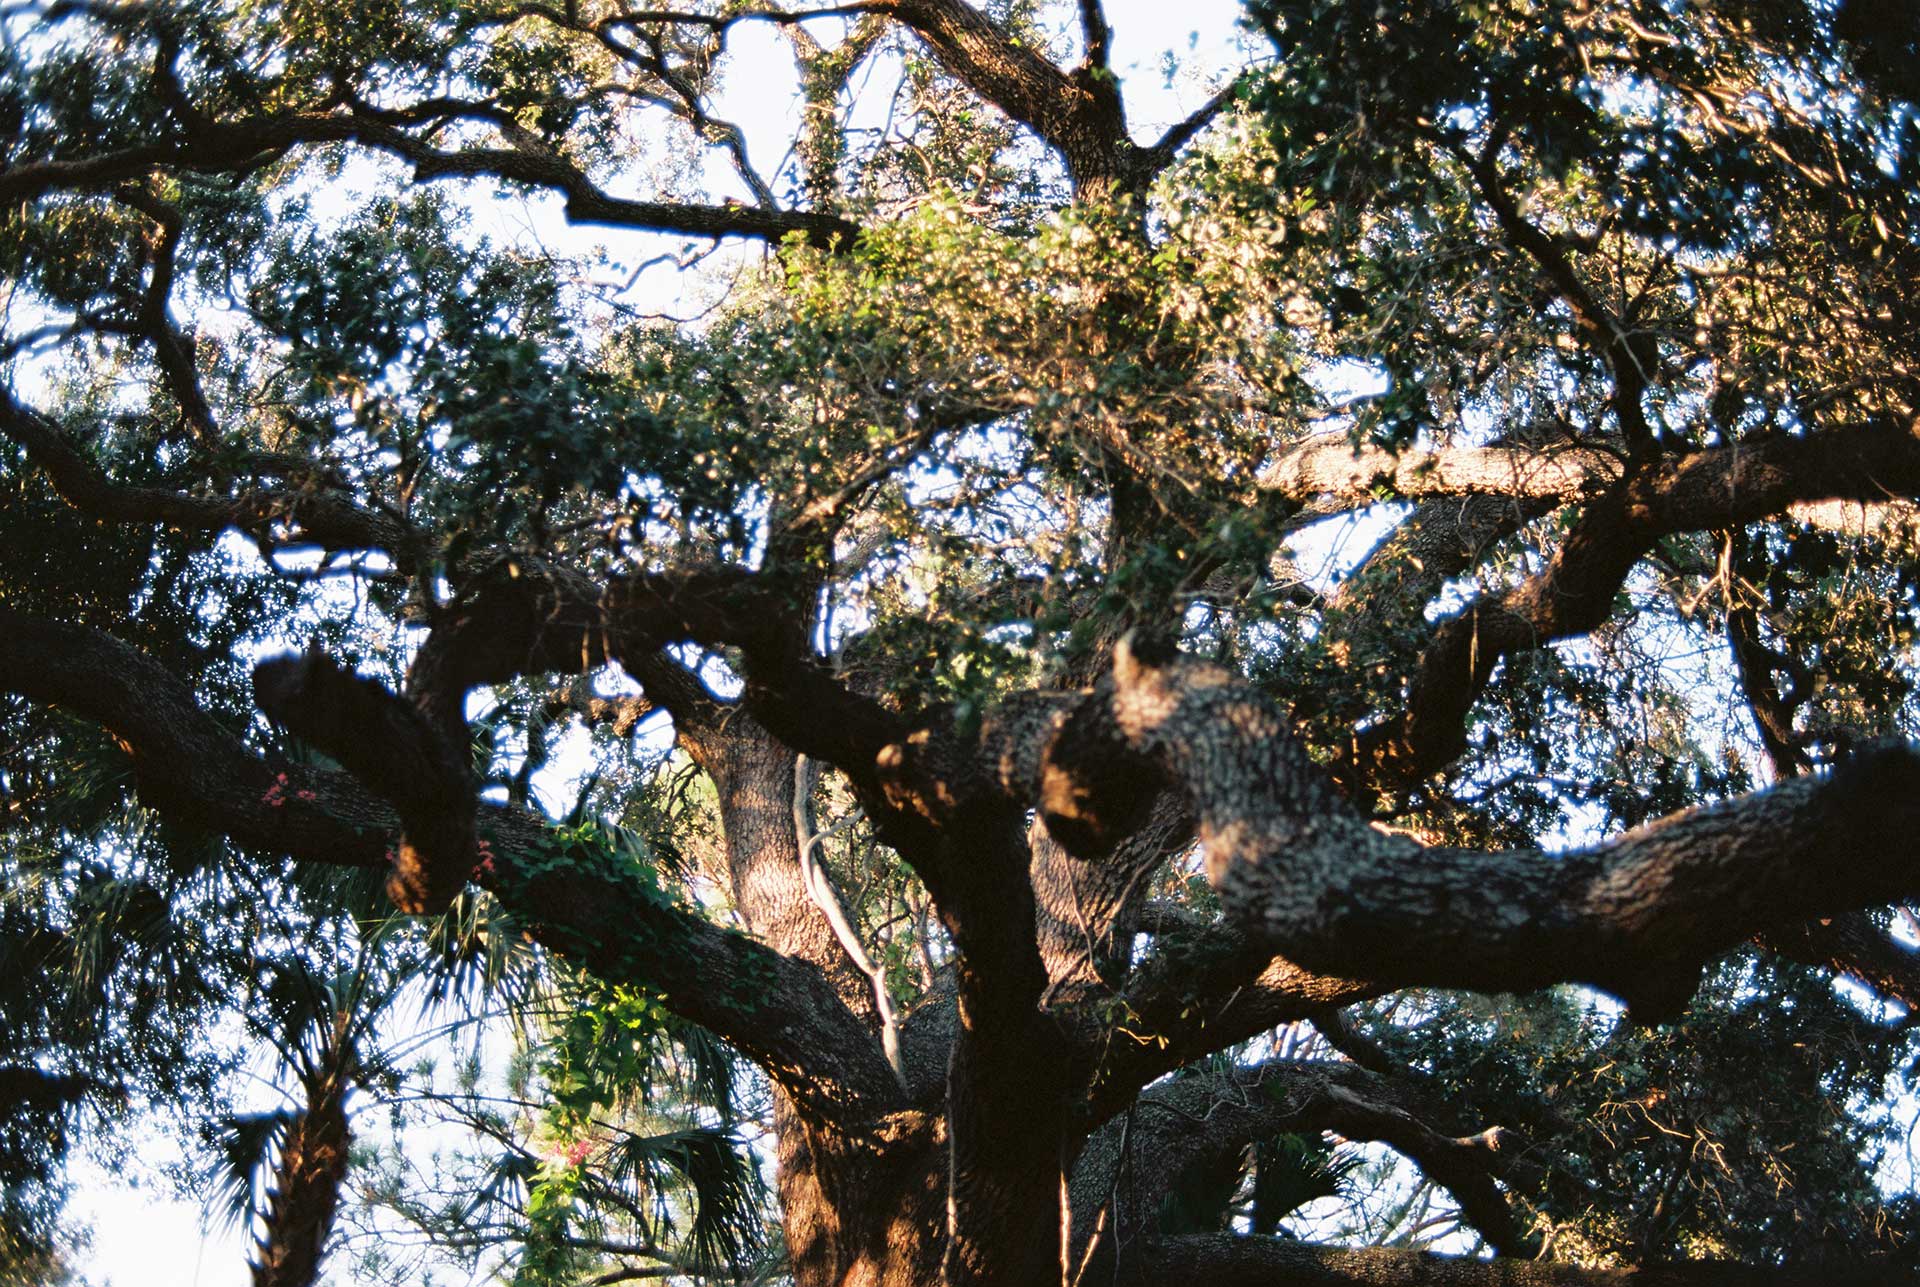 We moved our operation beneath the shade of a live oak. (Photo by Ethan Payne)